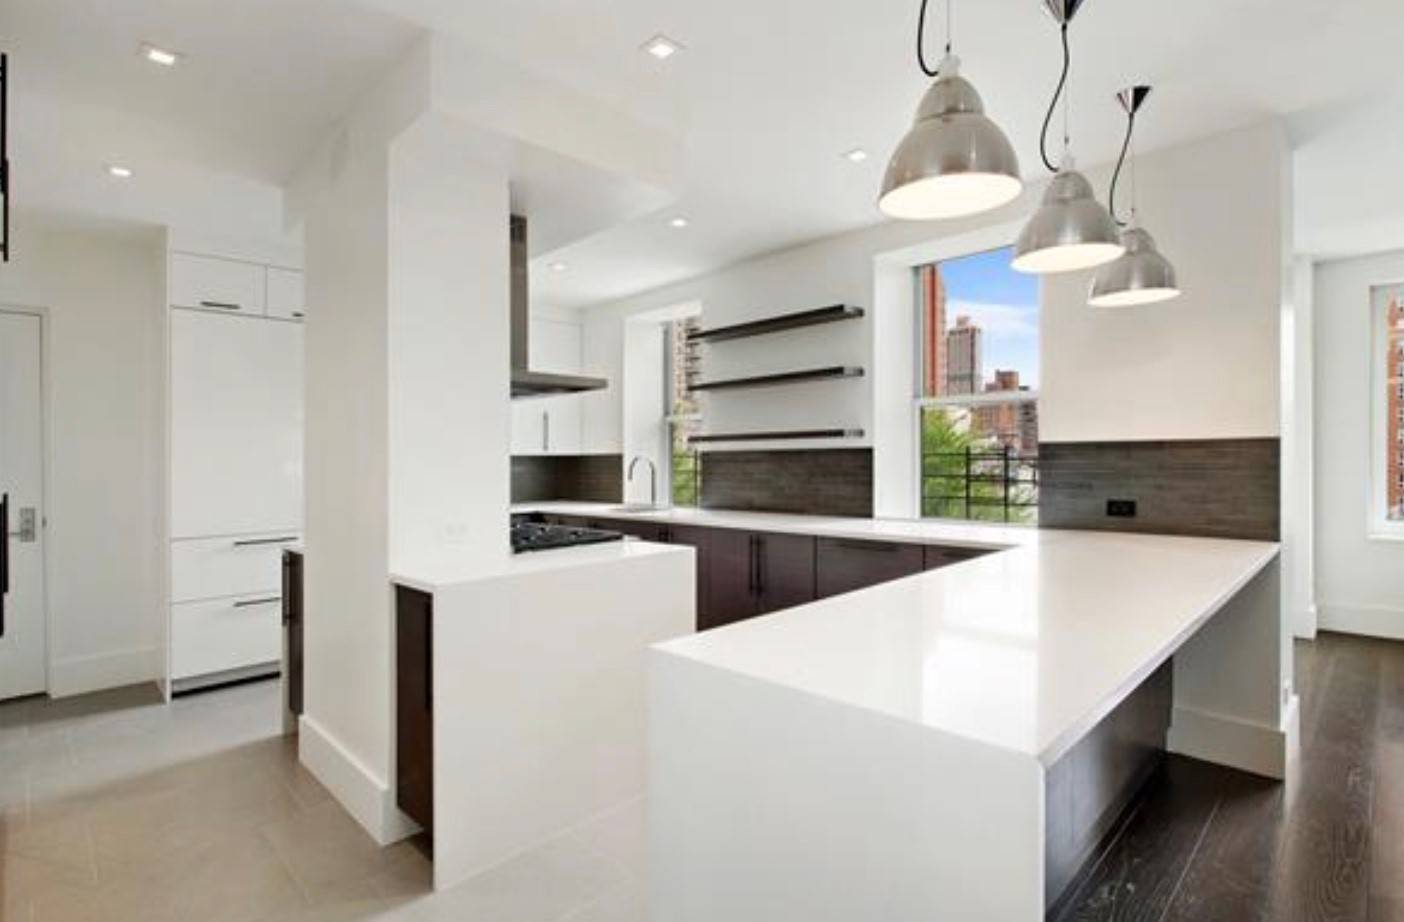 NO FEE, Luxury Meticulously Renovated 2,700 SQ FT 4 bed/3.5 bath on the Upper East Side, PS-6 School District